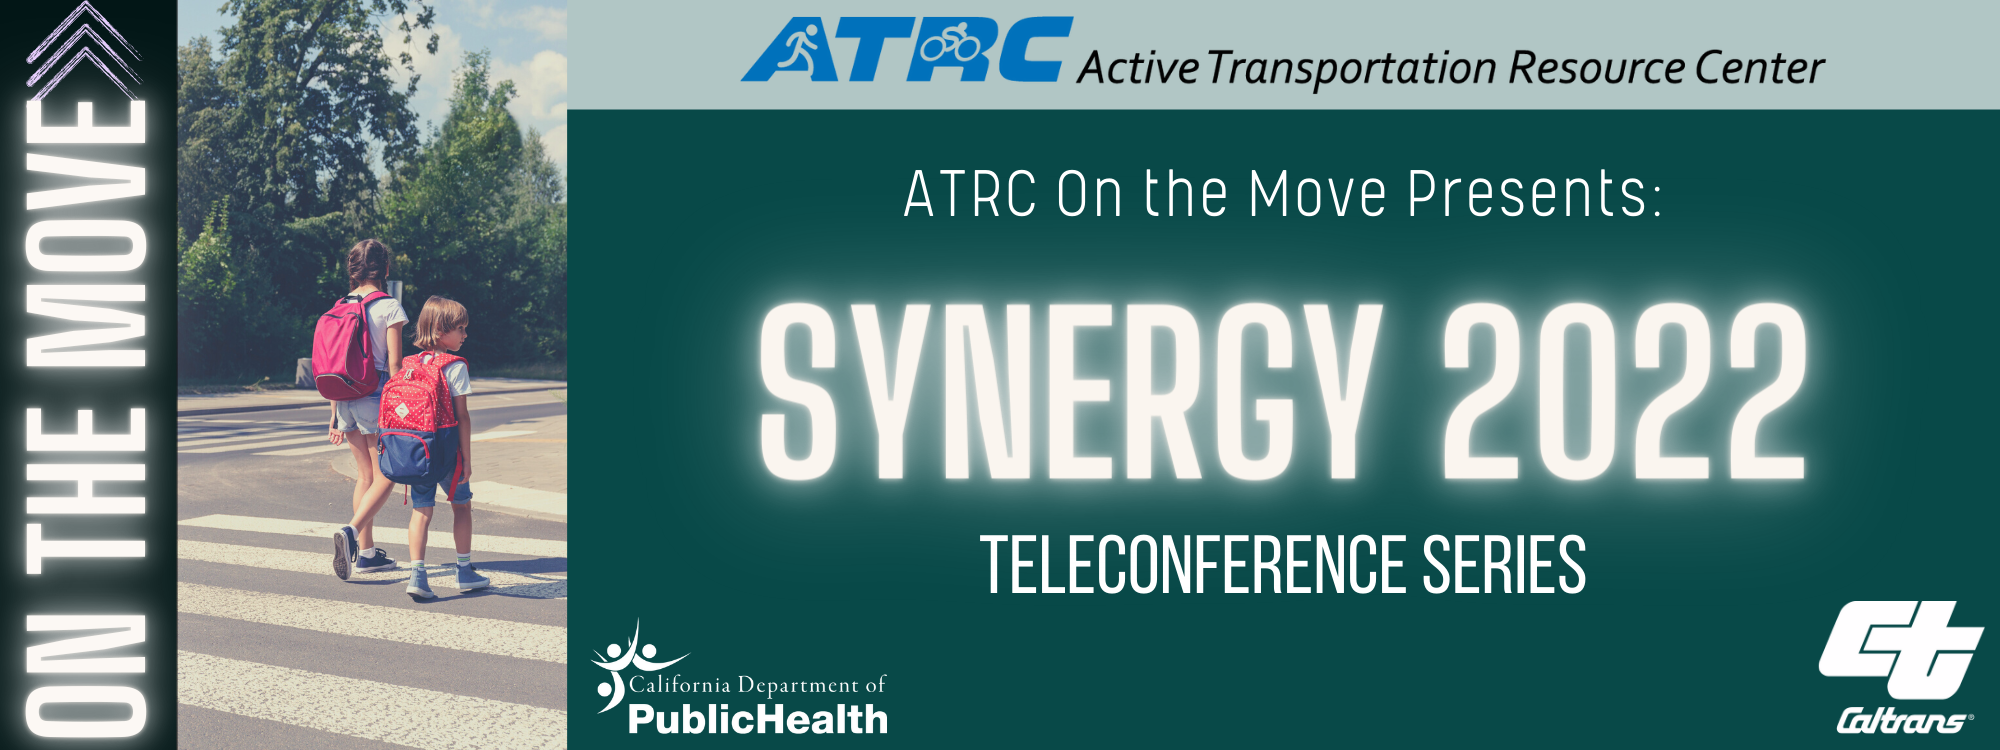  Synergy 2022 Teleconference Series"